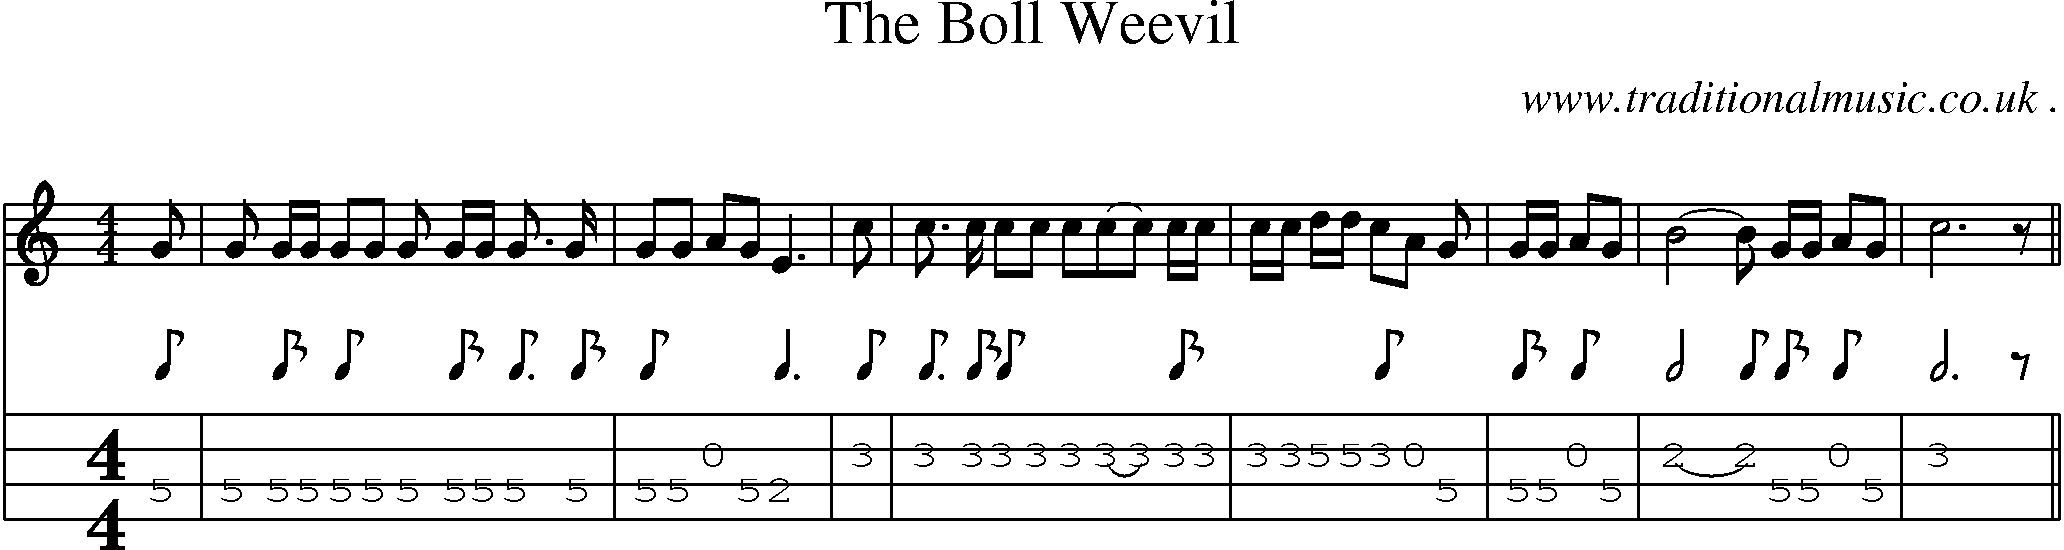 Music Score and Mandolin Tabs for The Boll Weevil